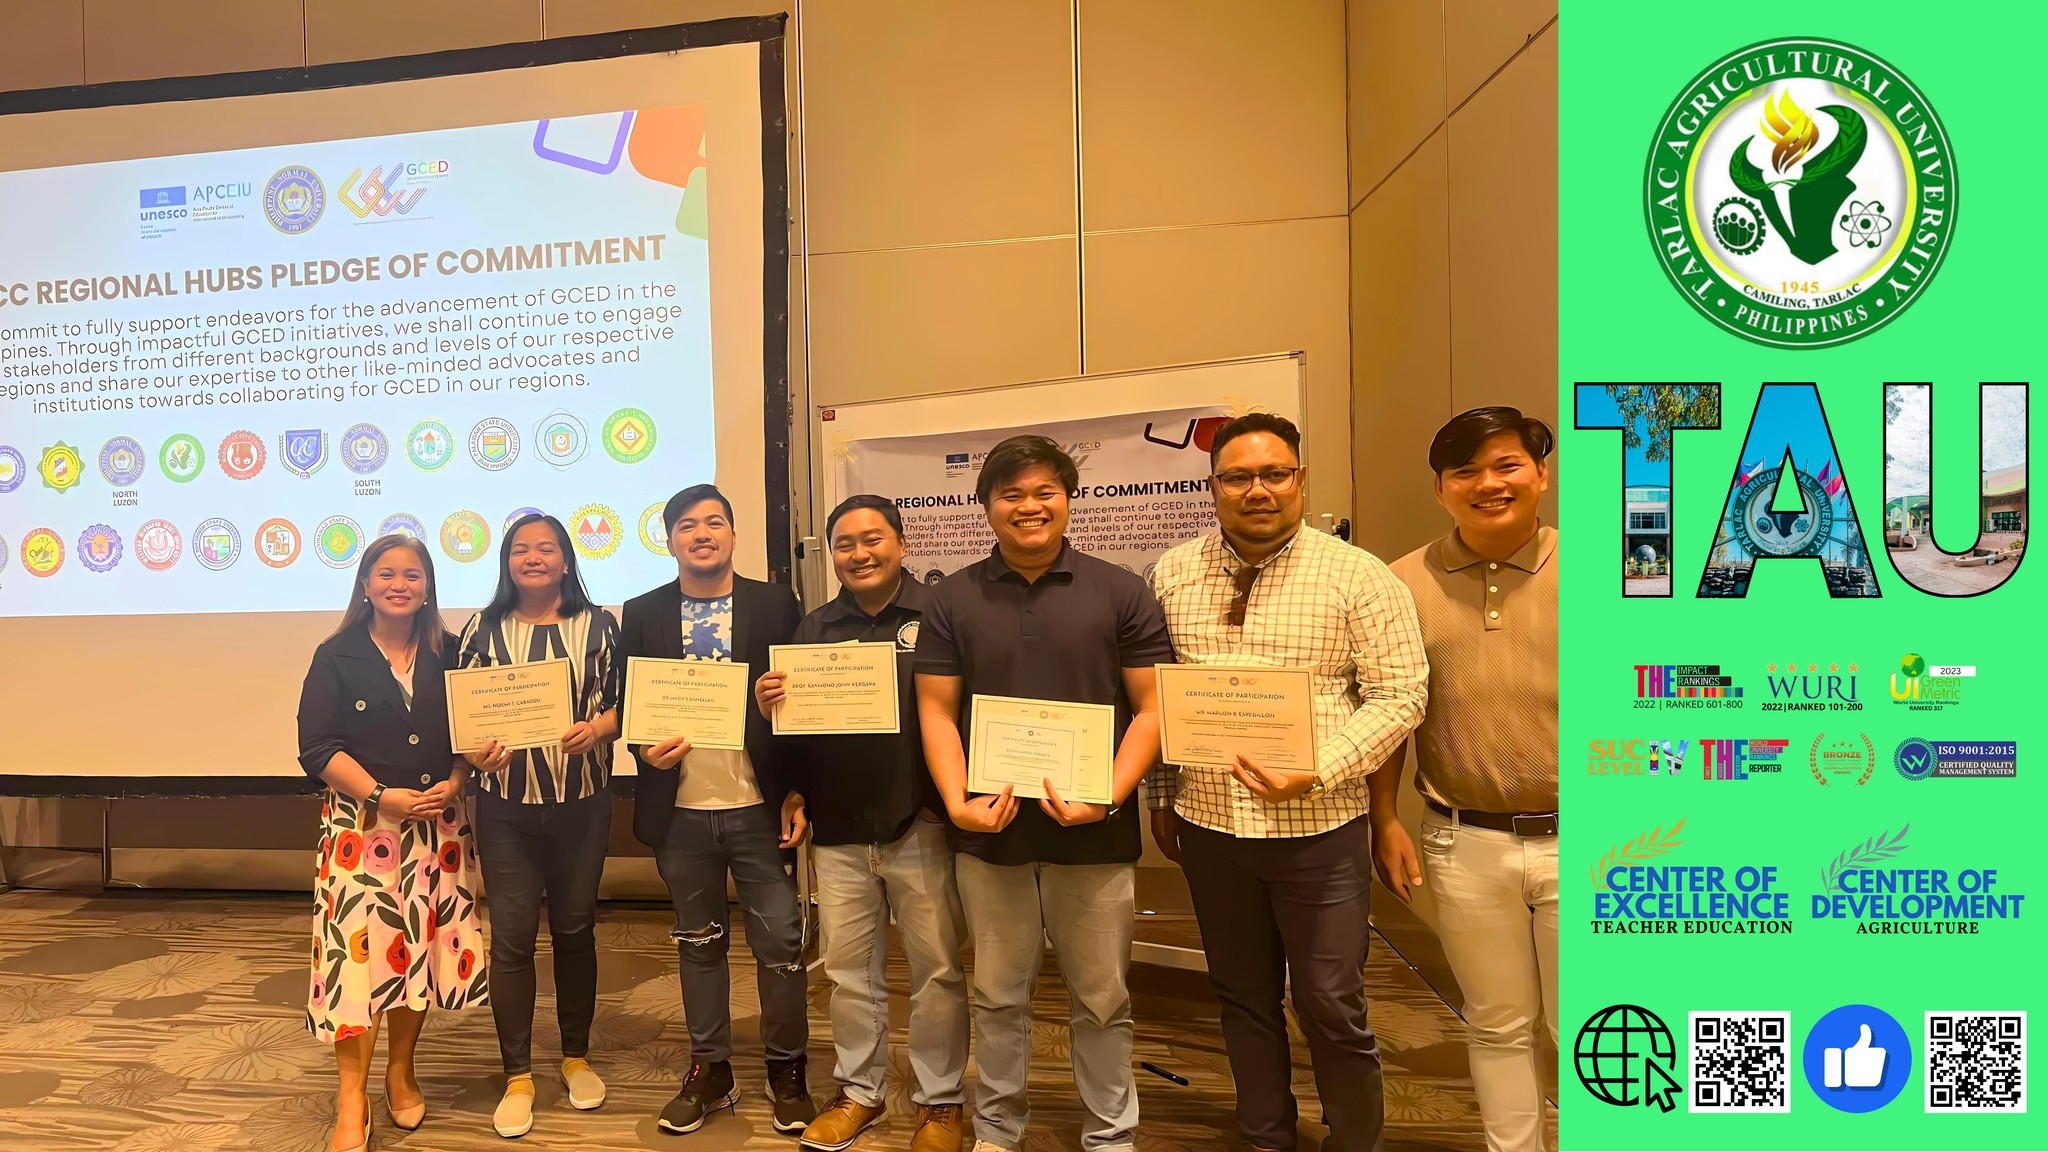 𝐂𝐀𝐏𝐓𝐔𝐑𝐄𝐃 𝐈𝐍 𝐋𝐄𝐍𝐒 | As the first GCEd Cooperation Center (GCC) Regional Hub in Central Luzon, Tarlac Agricultural University (TAU) 